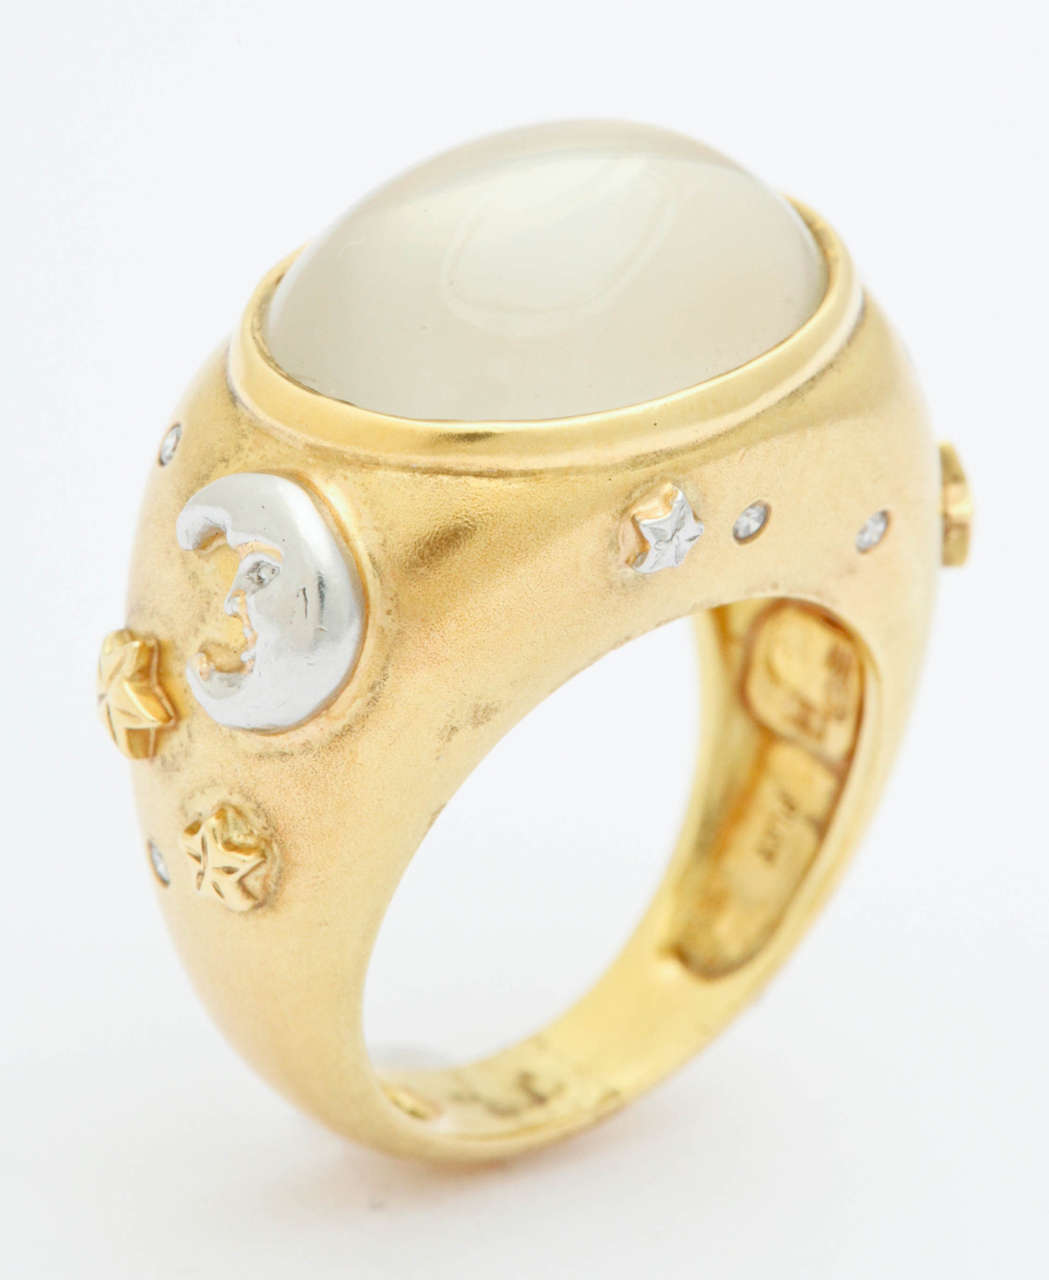 Off to another galaxy with this 18K and platinum ring. The center moonstone is 9.5 cts and approximately 1/2 in. by 3/4 in.

A platinum happy faced star and crescent moon are on either side of the moonstone along with engraved gold stars and a